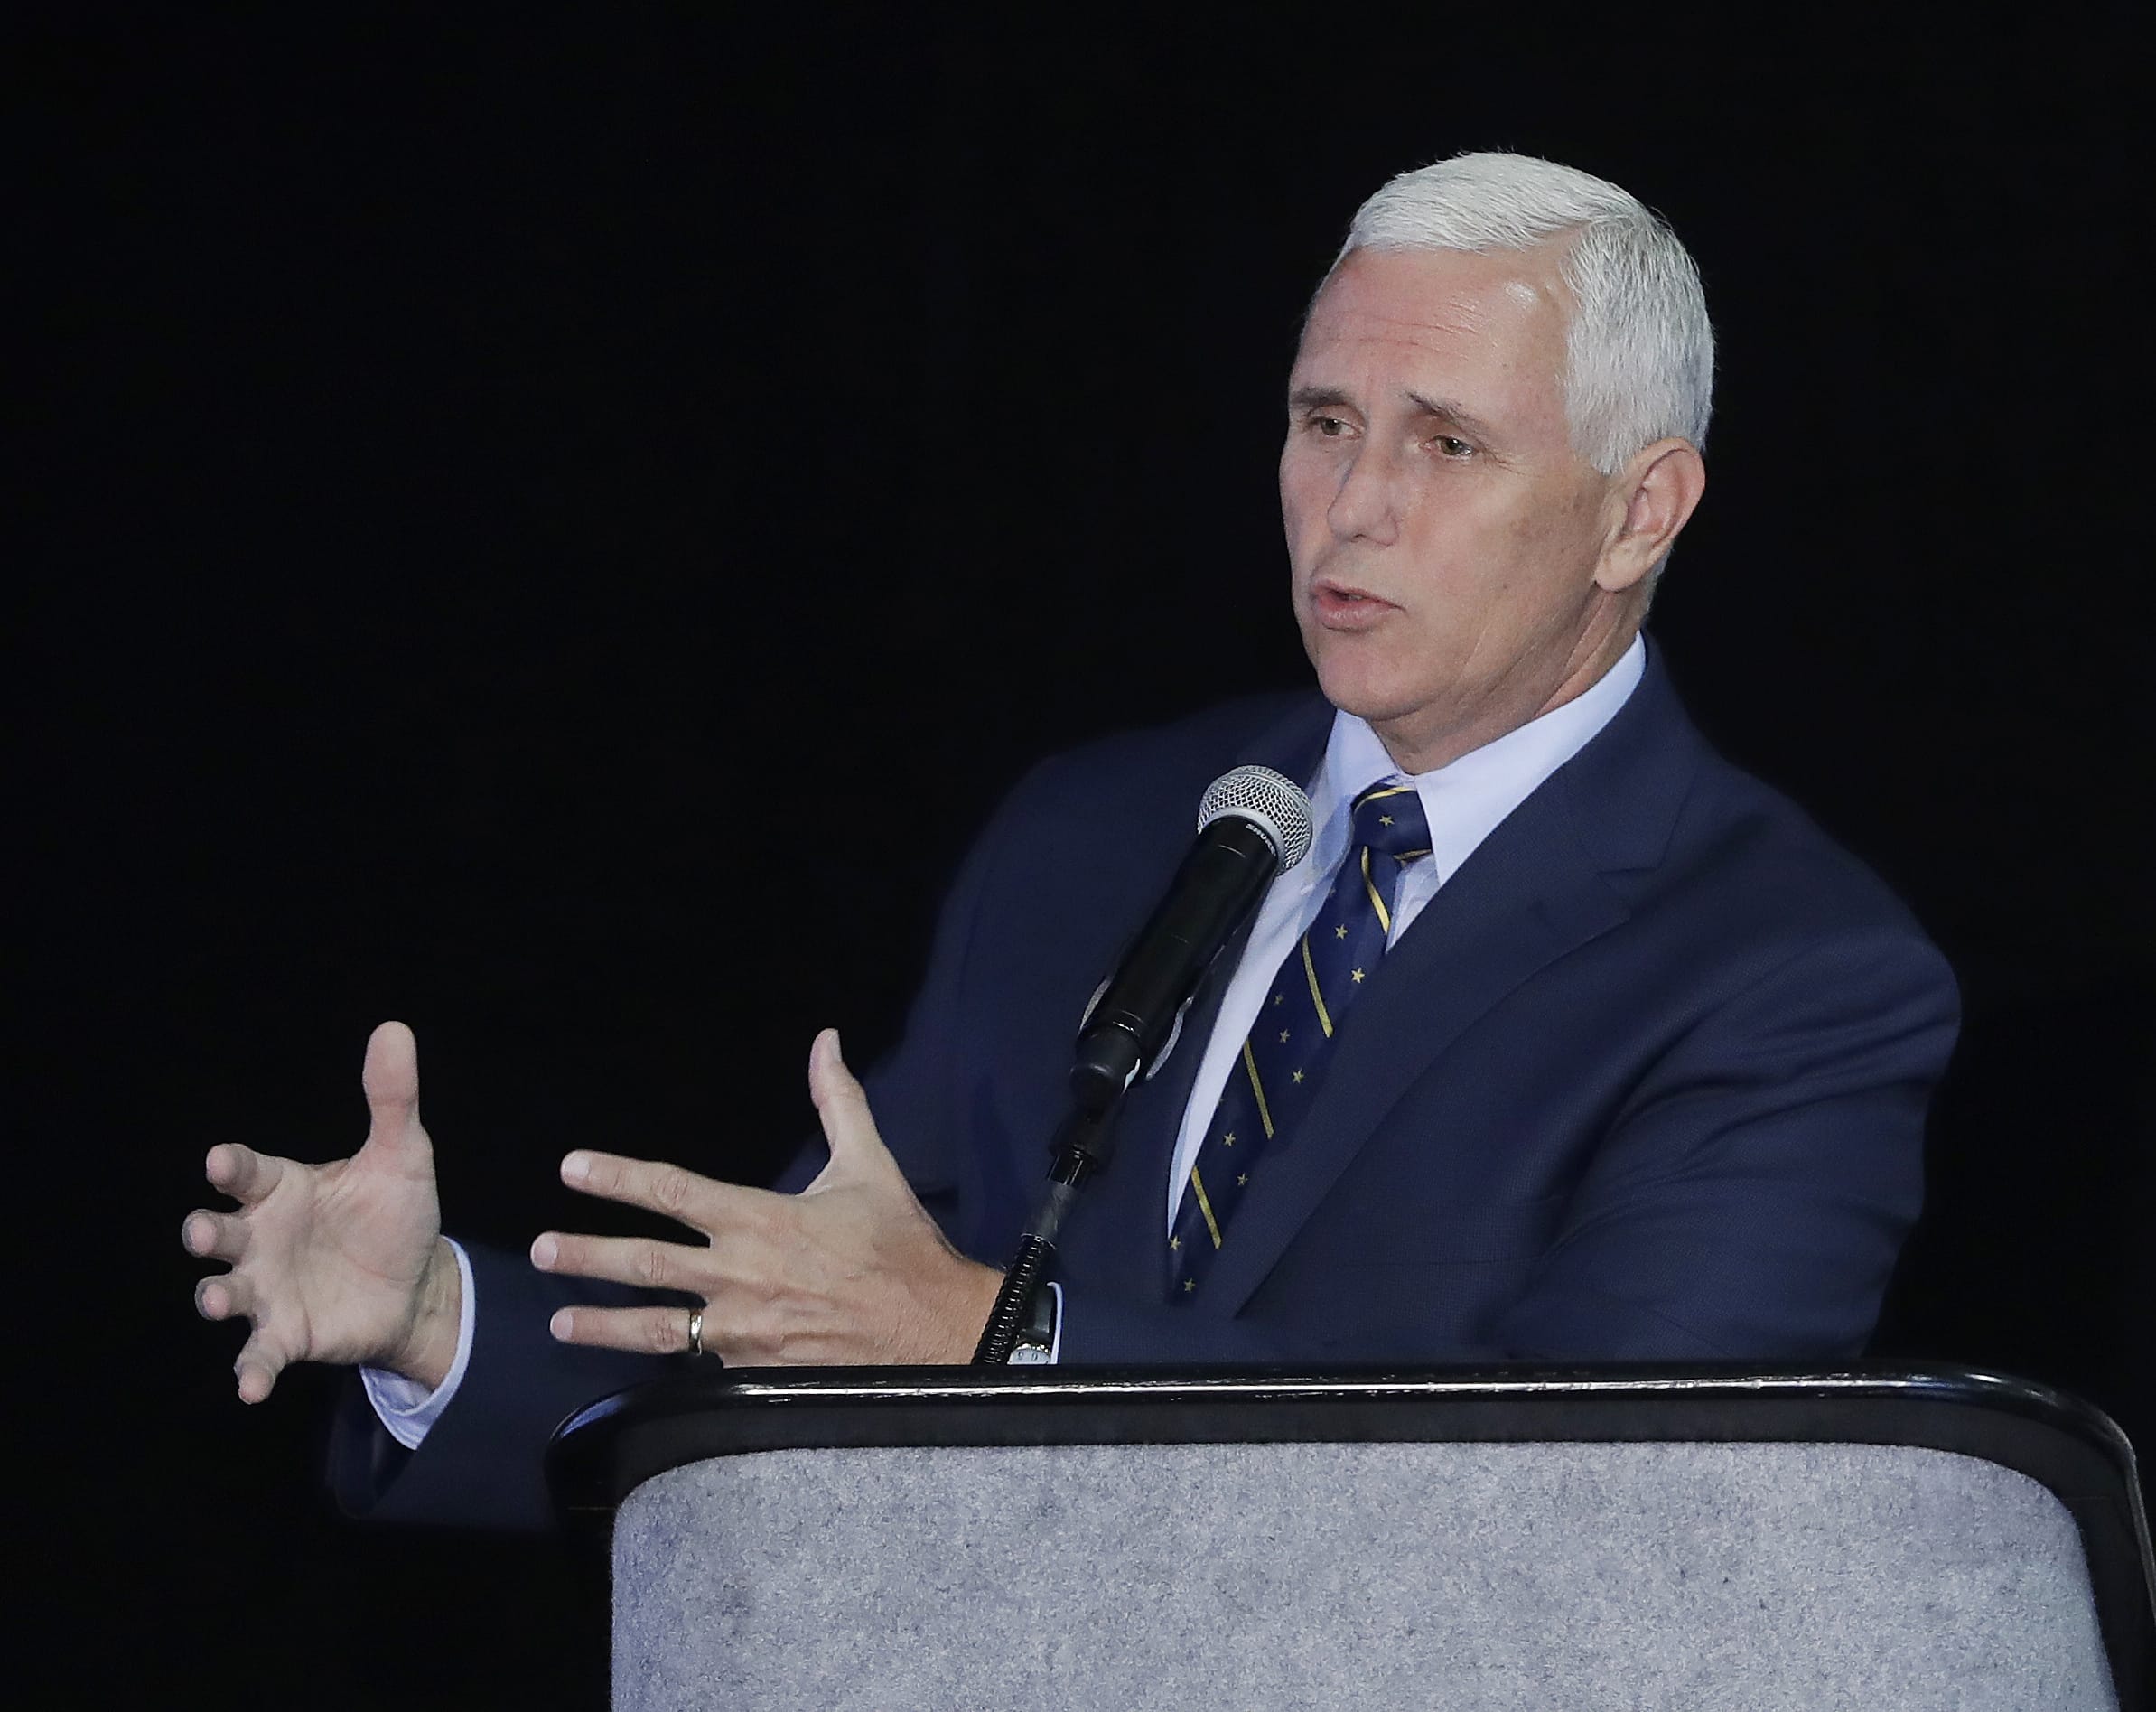 Indiana Gov. Mike Pence speaks in Indianapolis. Republican presidential candidate Donald Trump says on Twitter that he has picked Pence as his running mate.